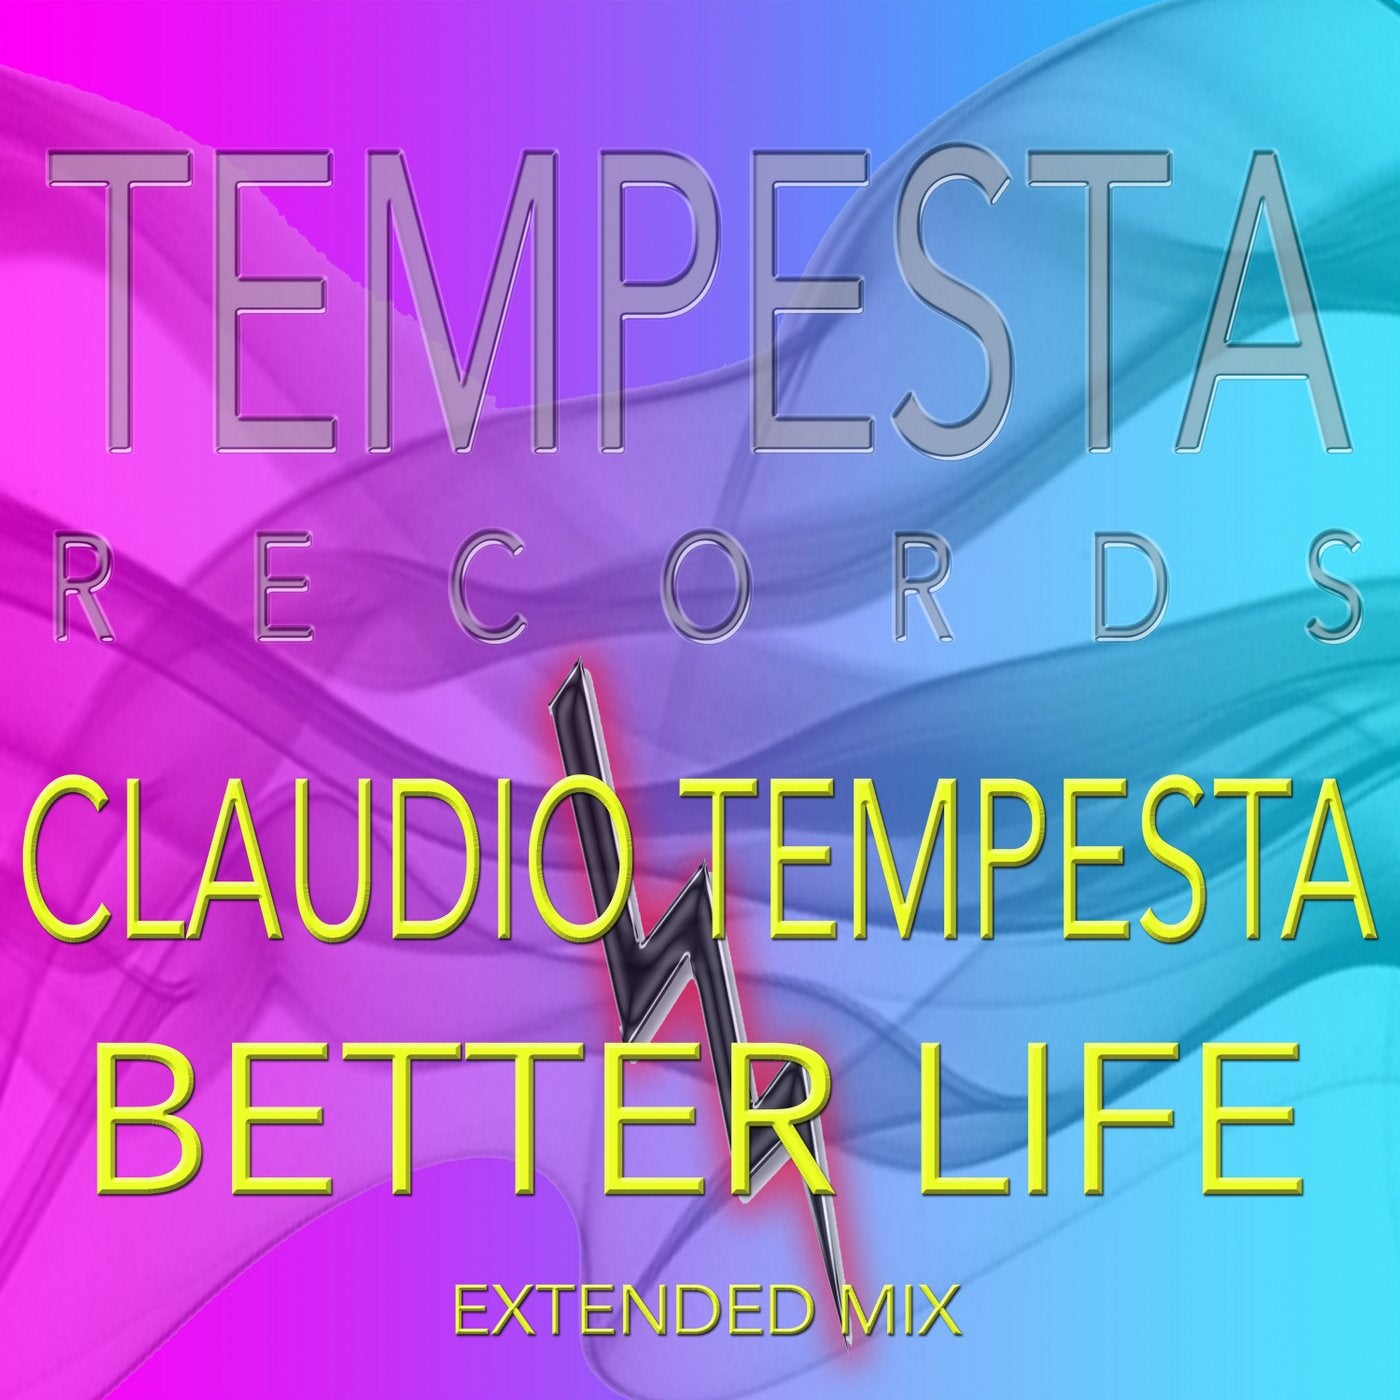 BETTER LIFE (EXTENDED MIX)